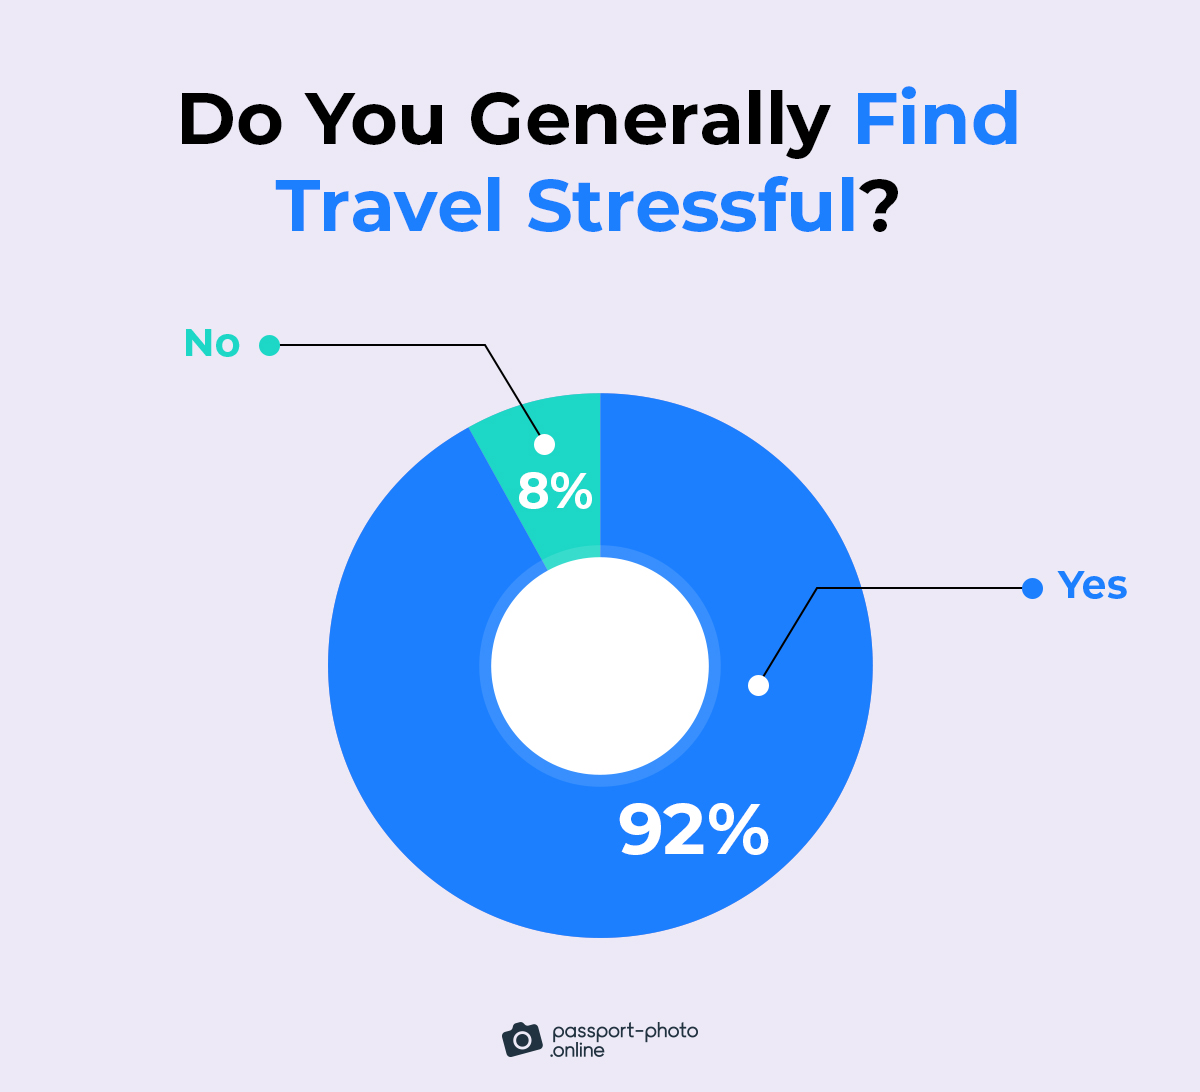 92% of people find travel stressful